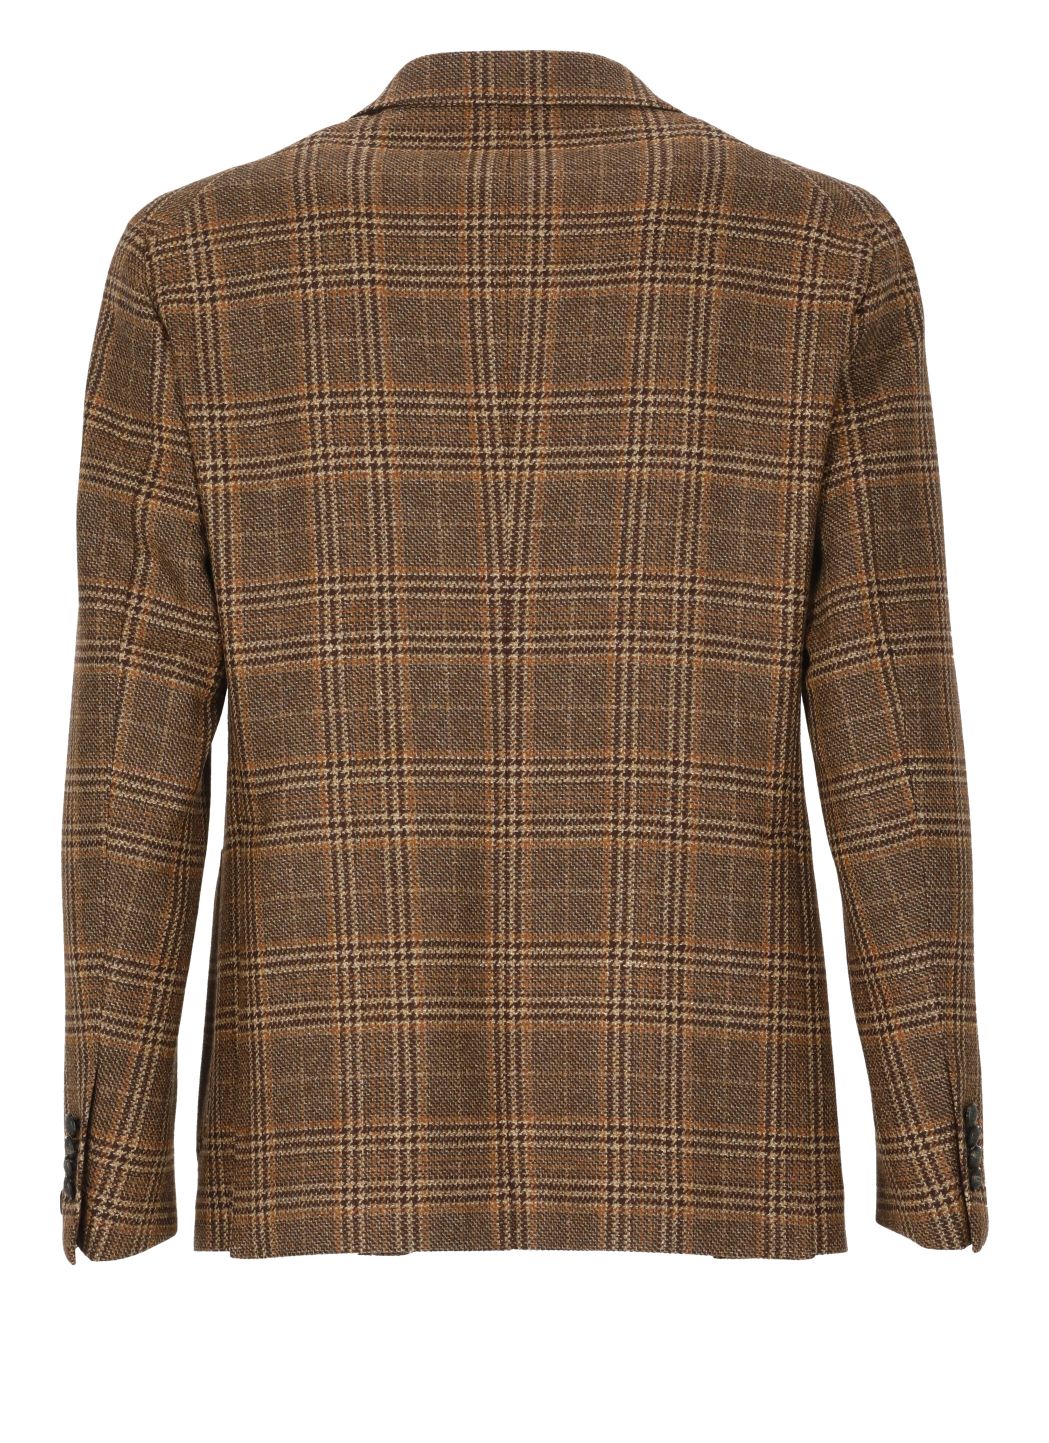 Prince of Wales single breasted jacket